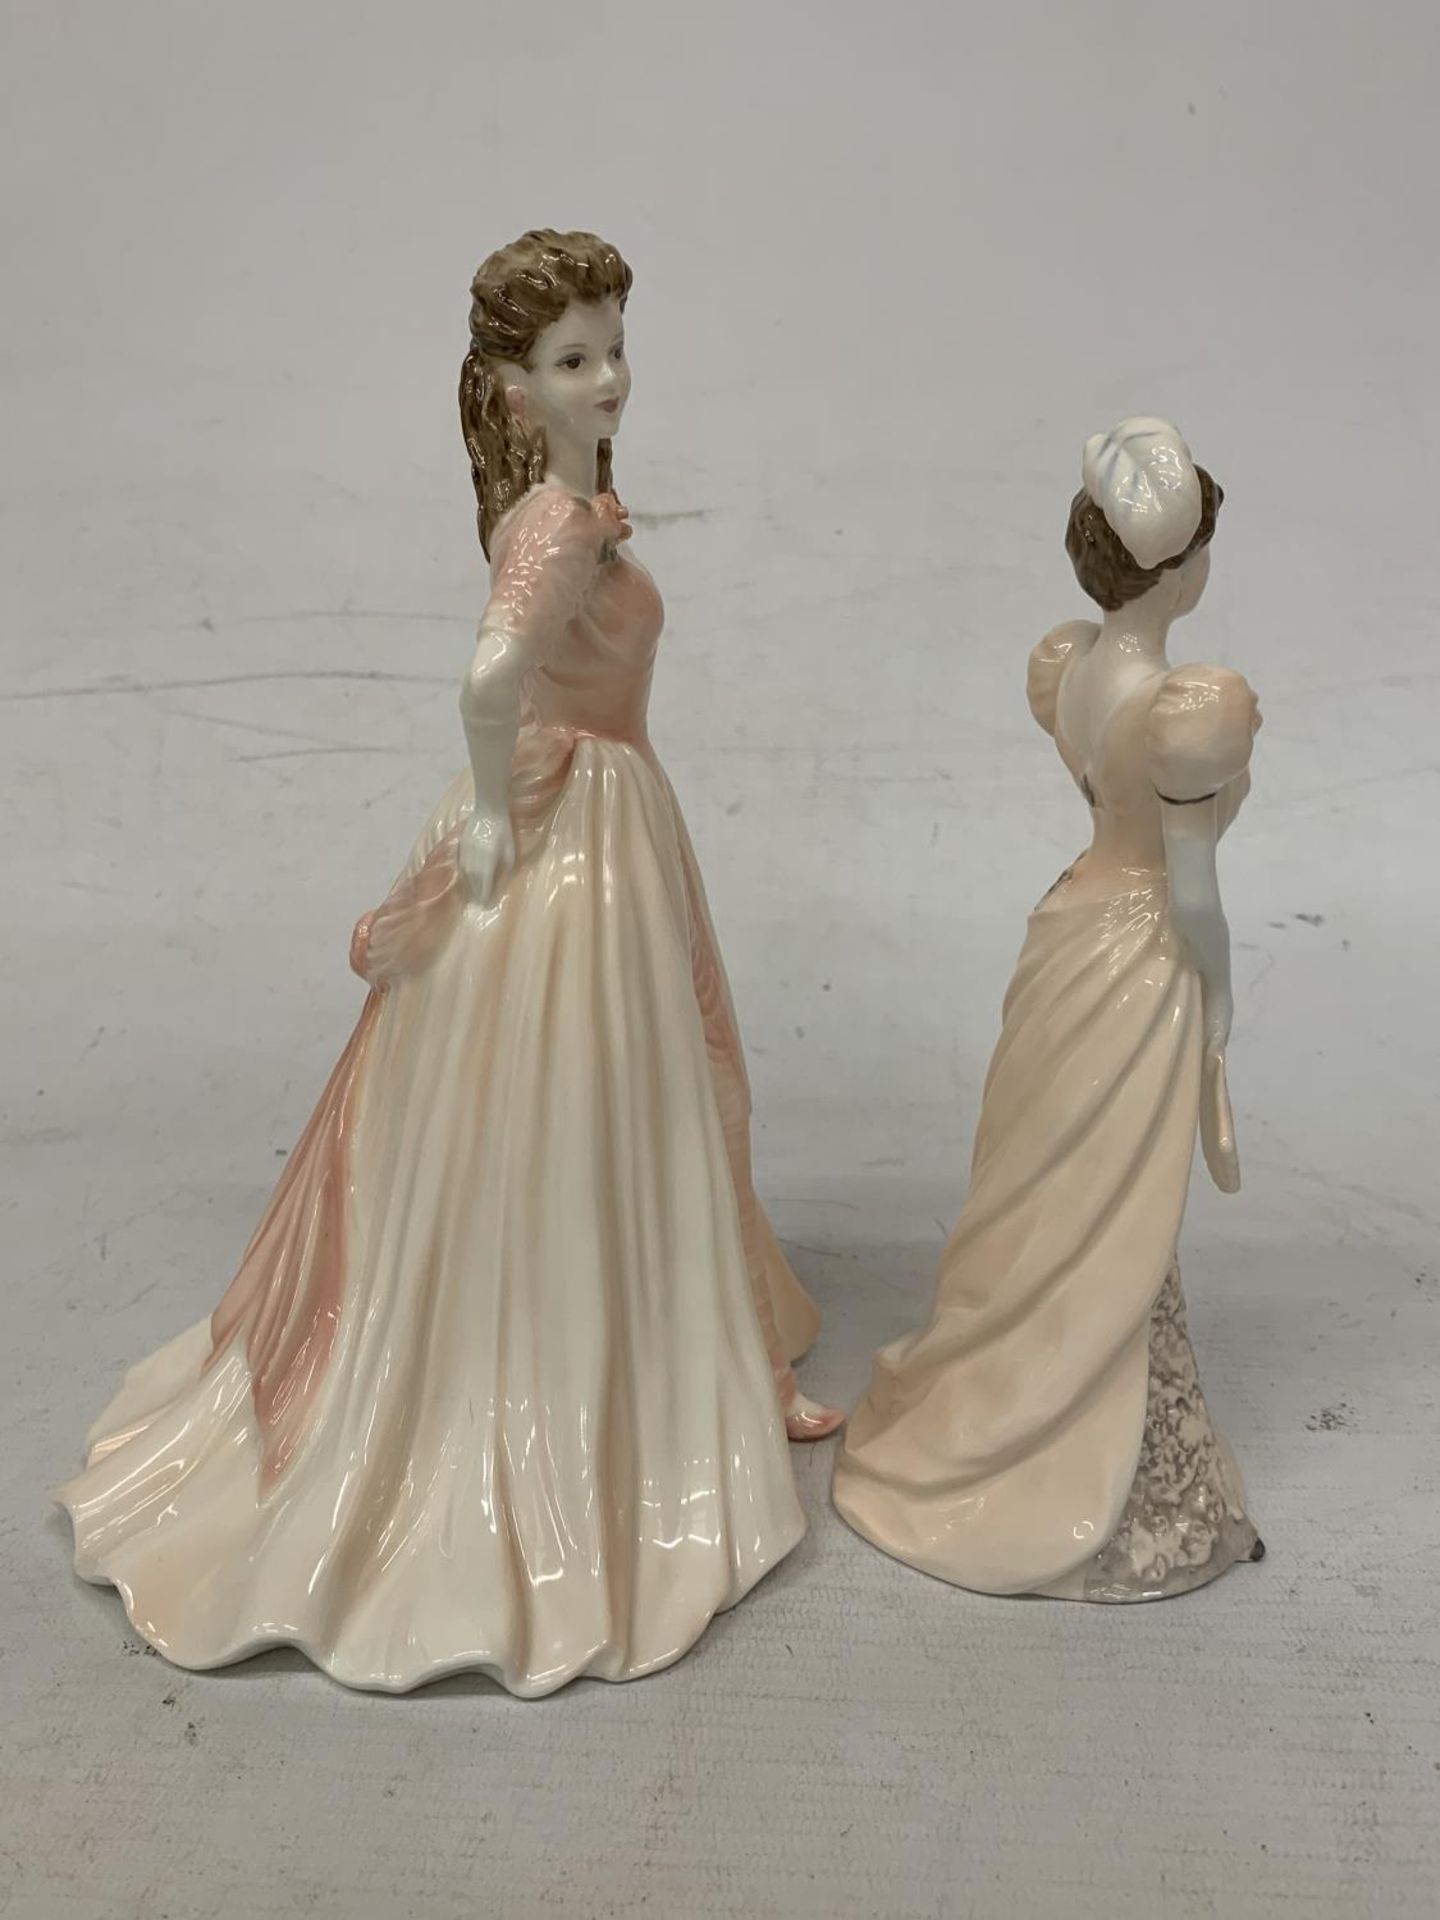 TWO COALPORT FIGURES - CHANTILLY LACE "VELVET" AND JACQUELINE FROM THE LADIES OF FASHION - Image 2 of 5